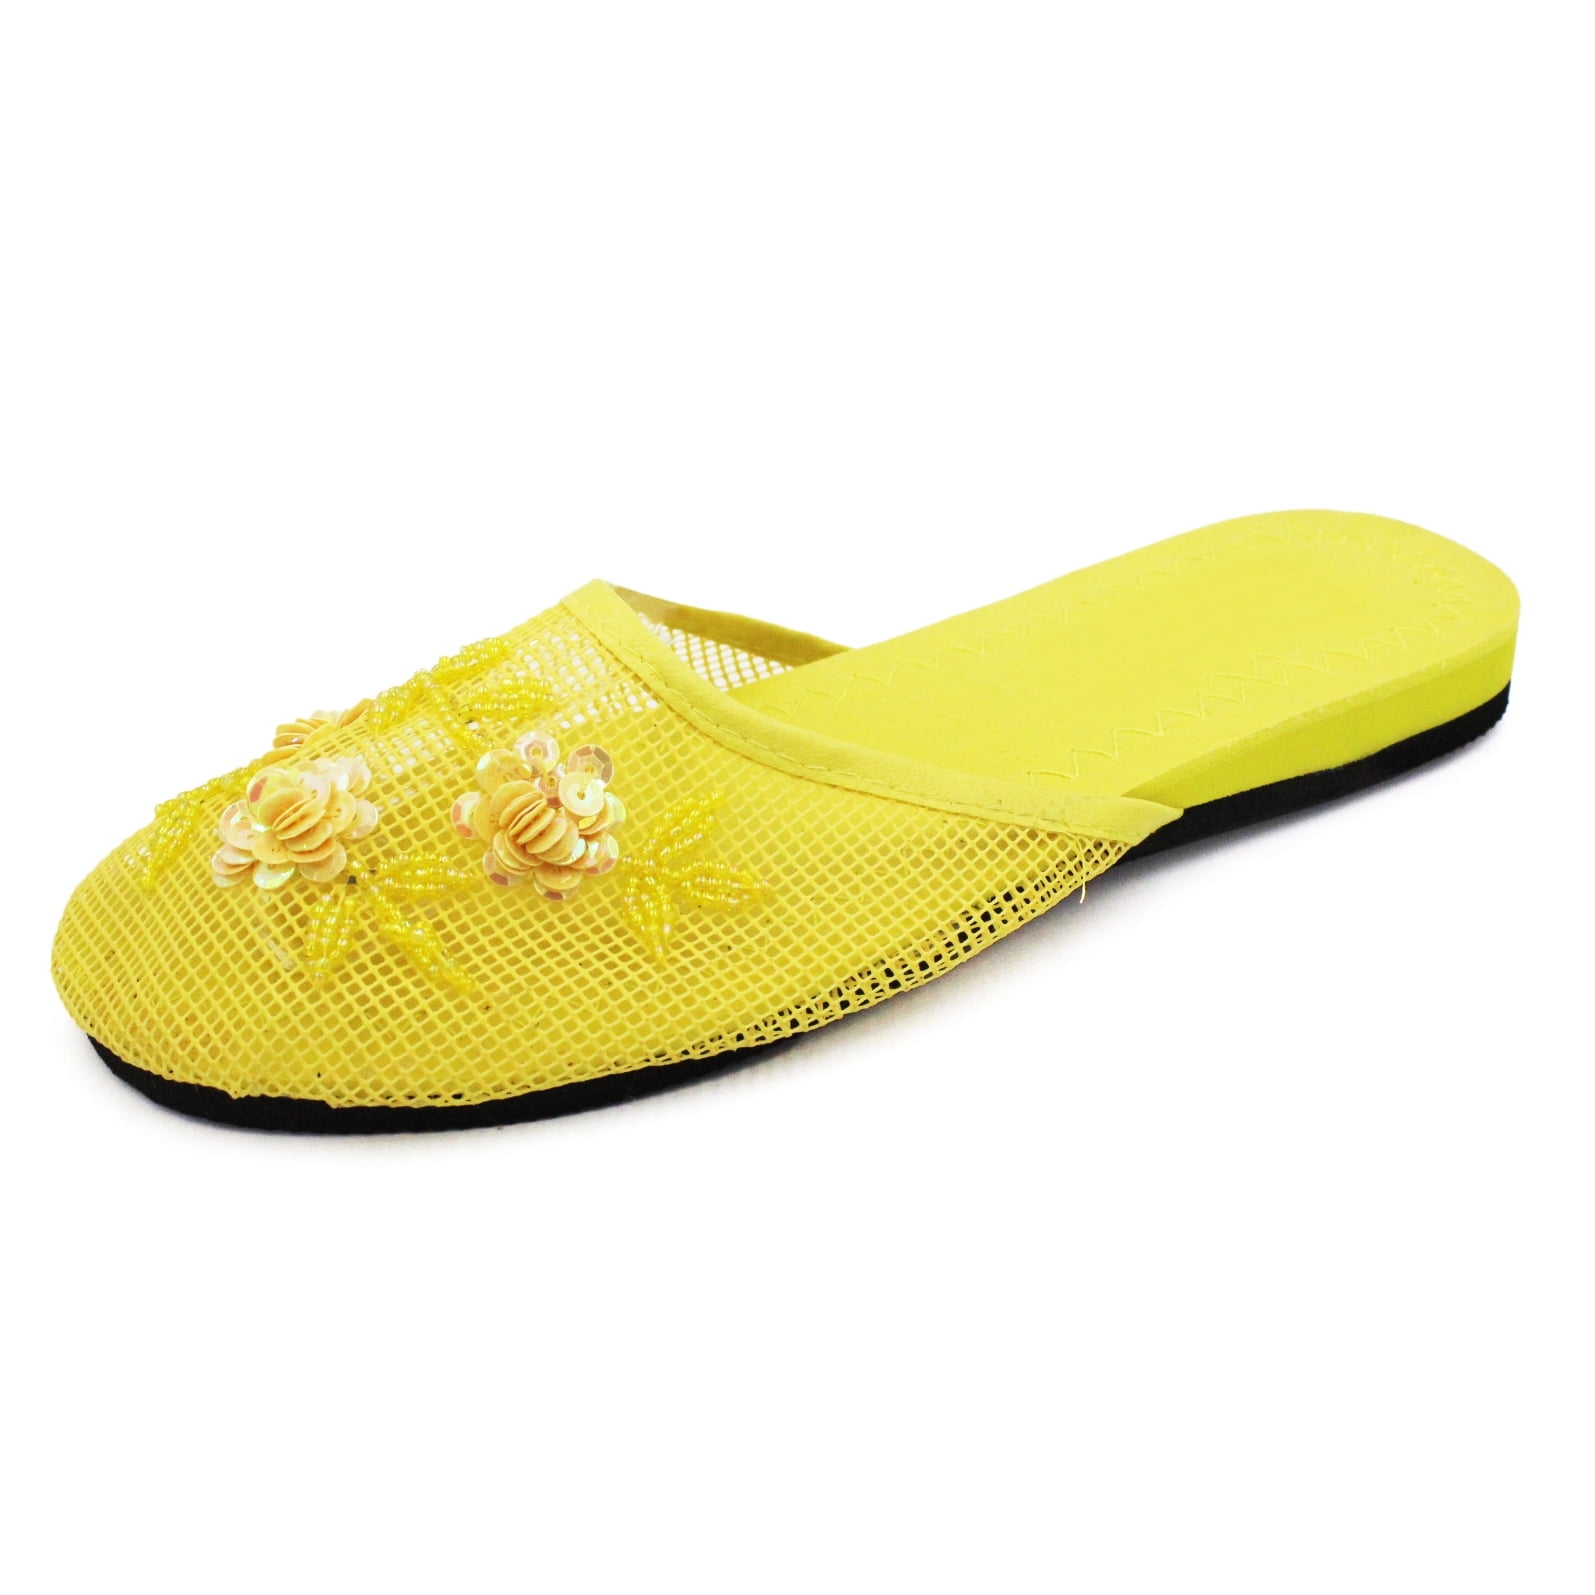 LAVRA Women s Mesh Sequin Slide Beaded Chinese Slippers Floral Embellished Shoes e583394c 3e66 4742 aeec dd84aa47f669.039aee3f661fcdb66fe0cf6d53c983c5